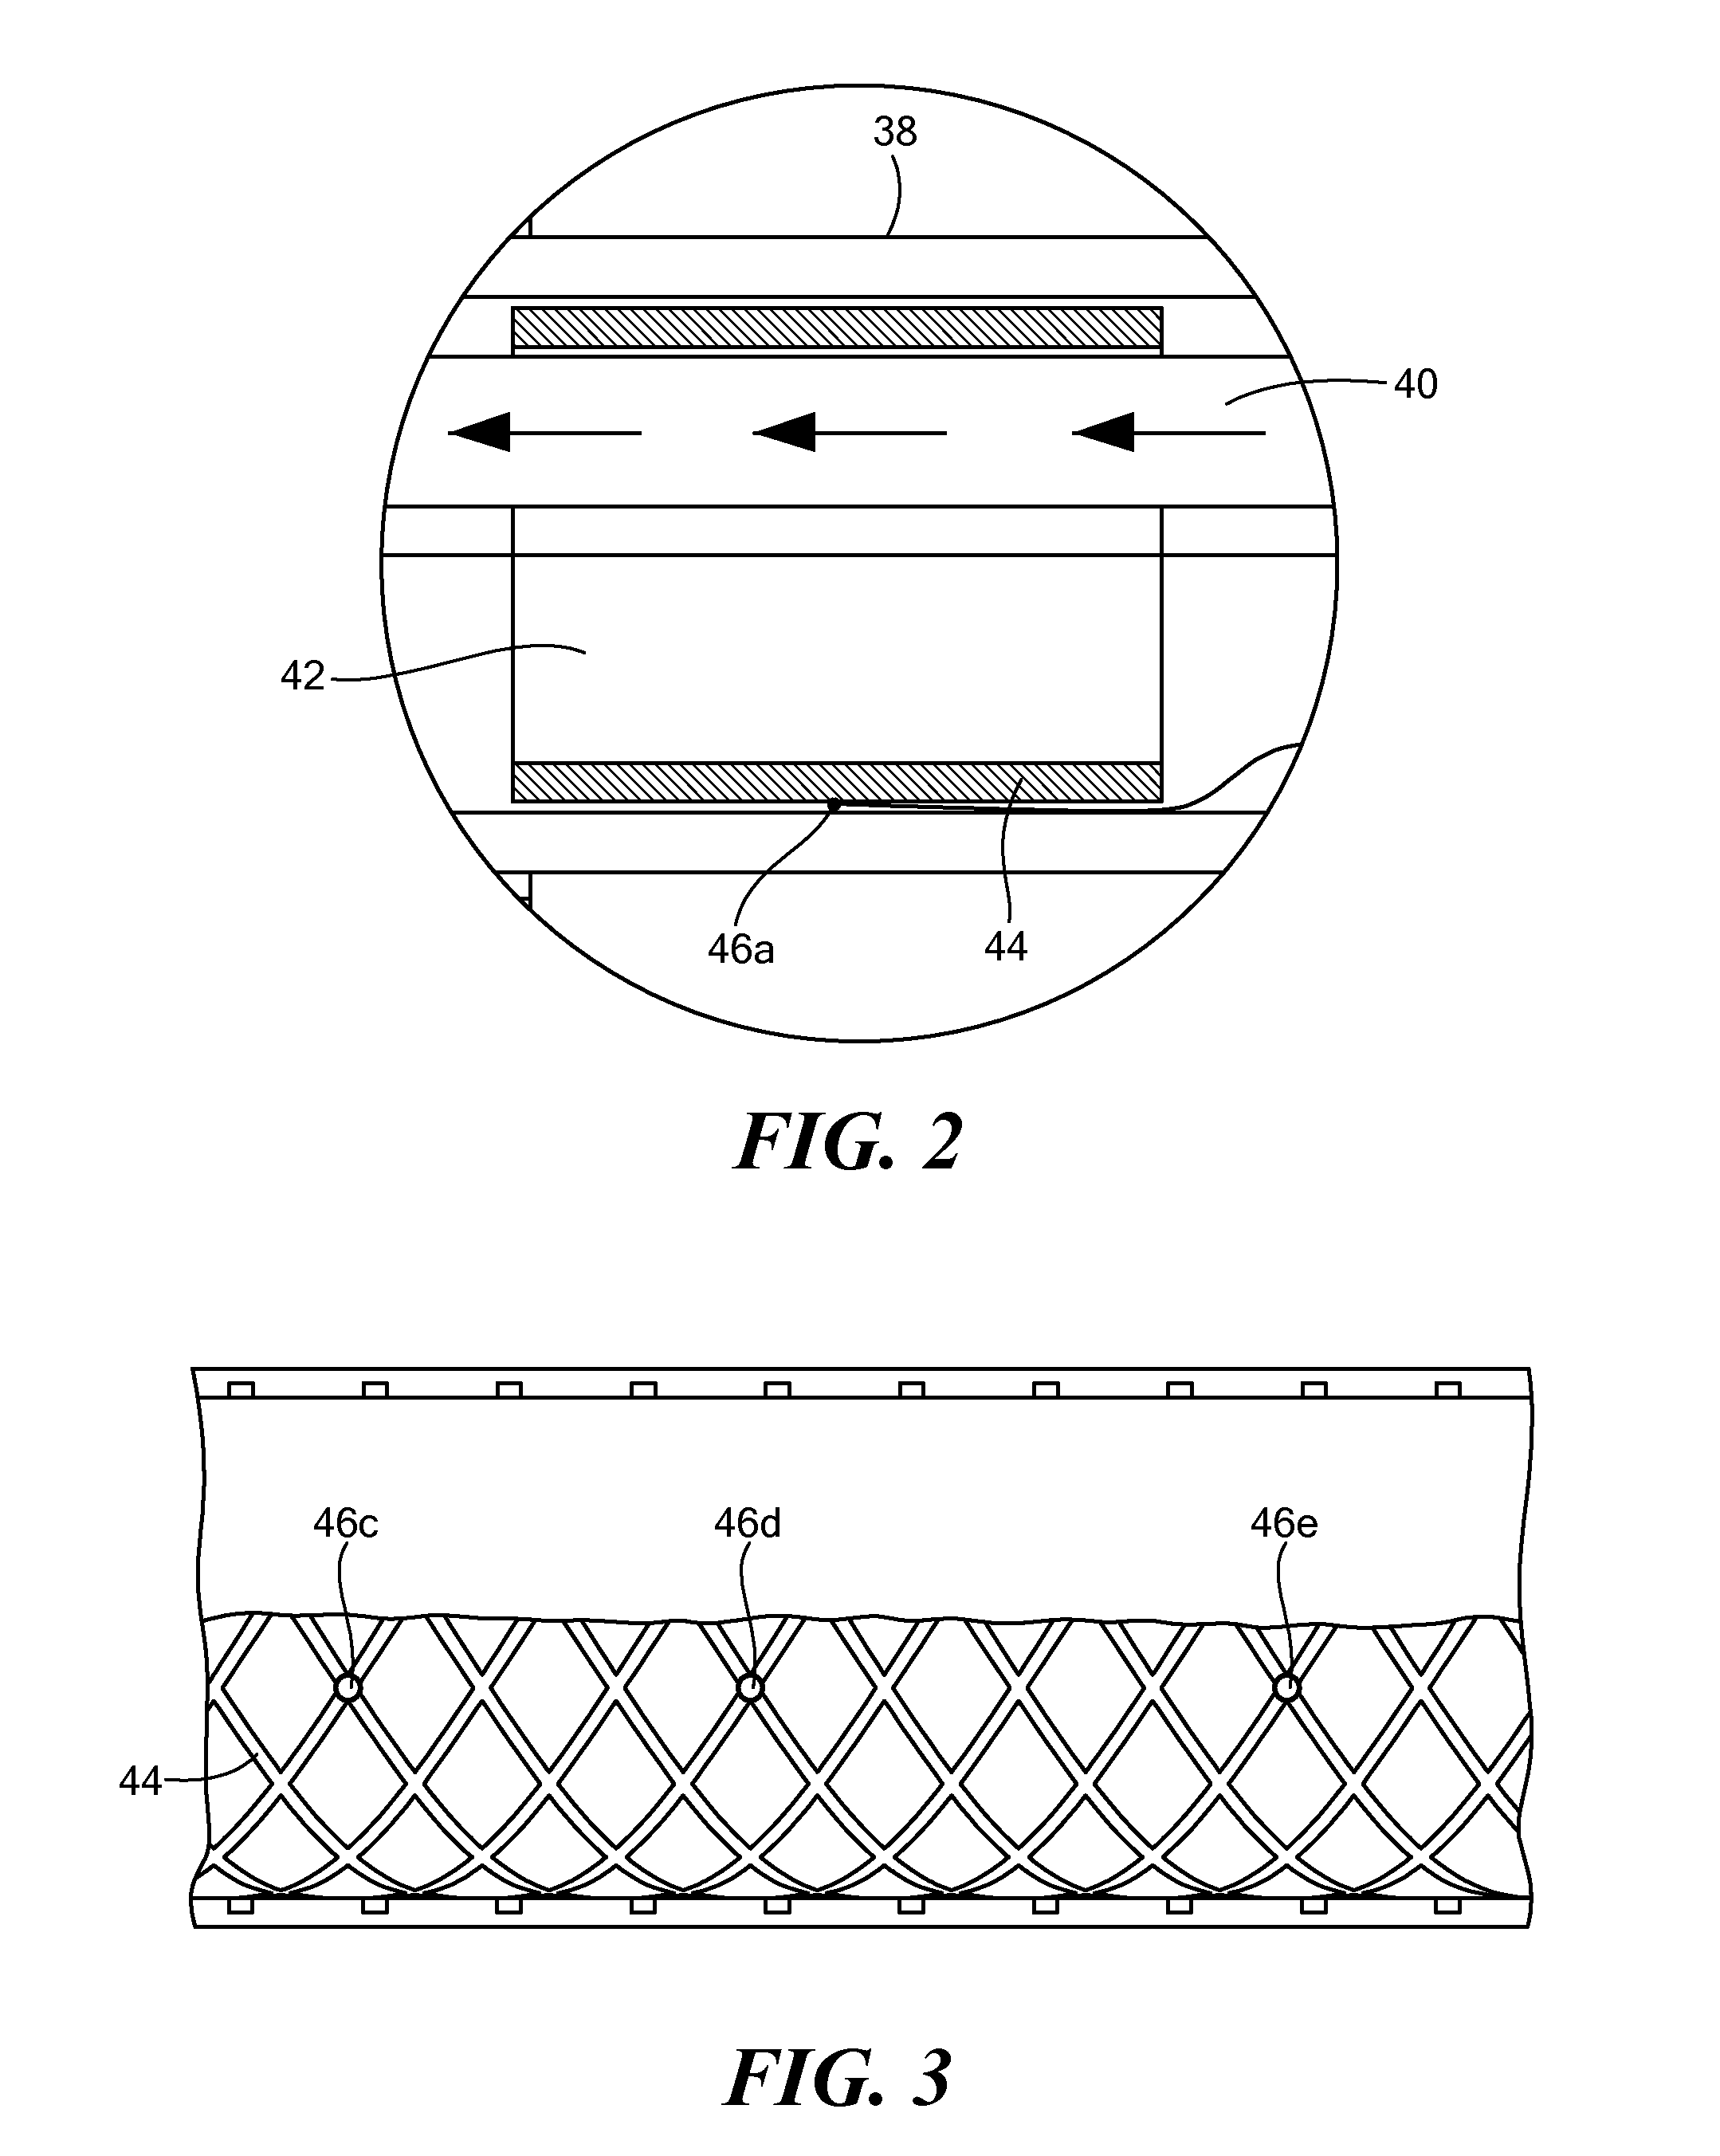 Thermocouple-controlled catether cooling system